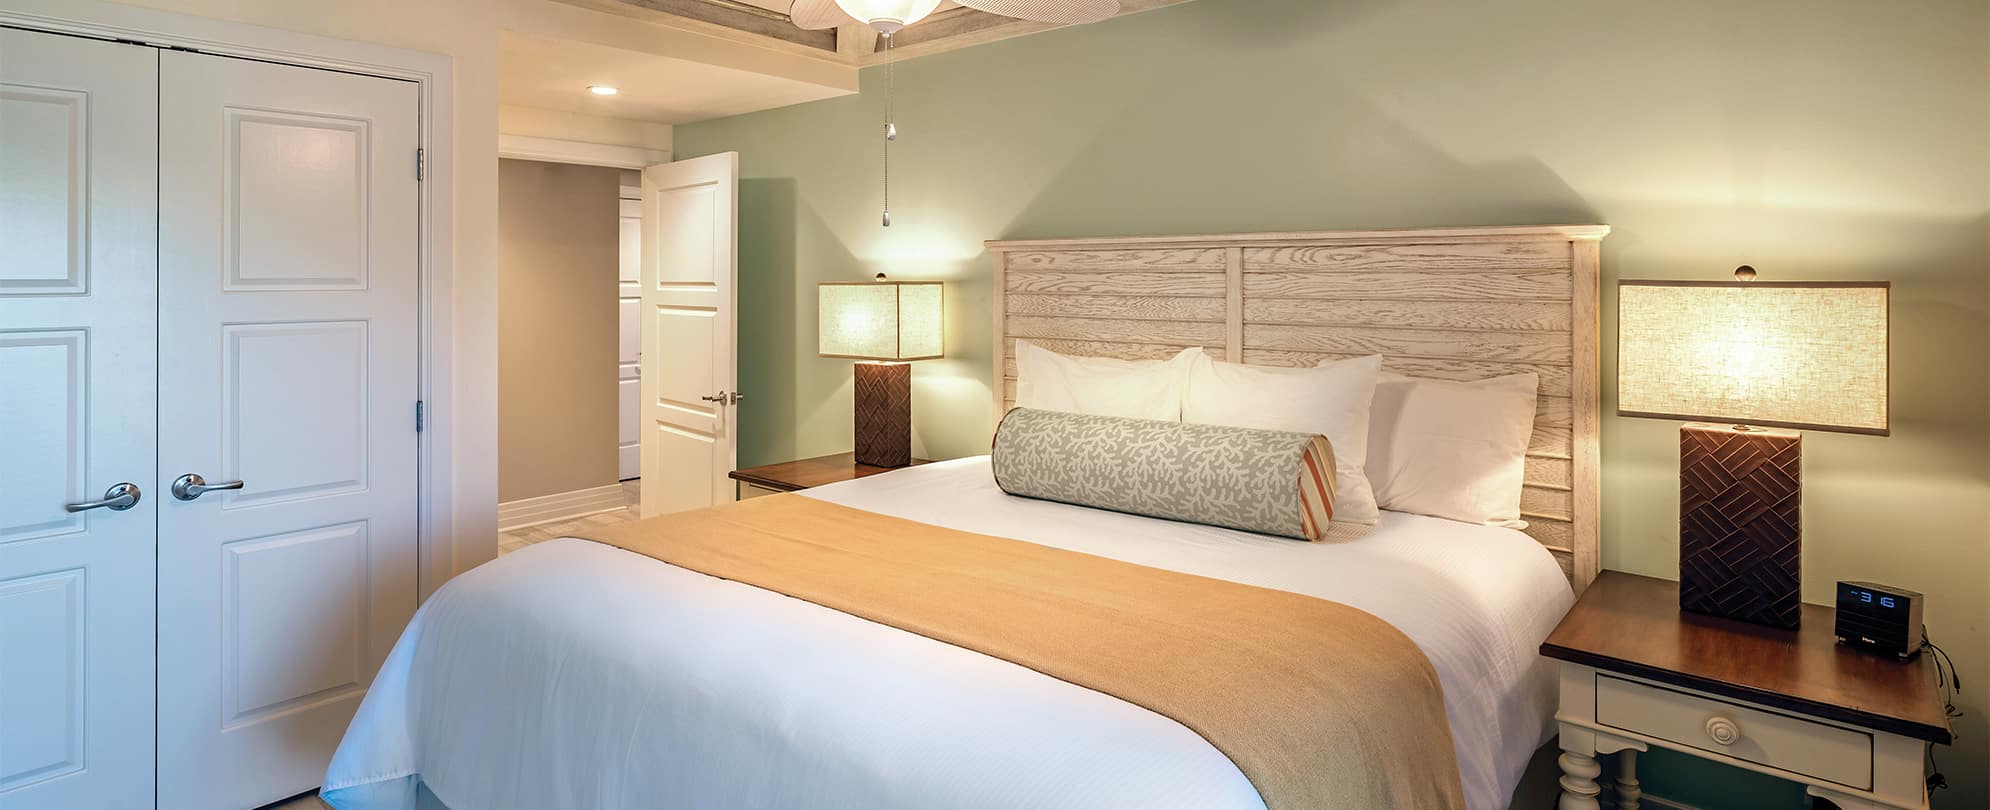 Bed with white linens and wood headboard in a Margaritaville Vacation Club Presidential Reserve suite in St. Thomas.